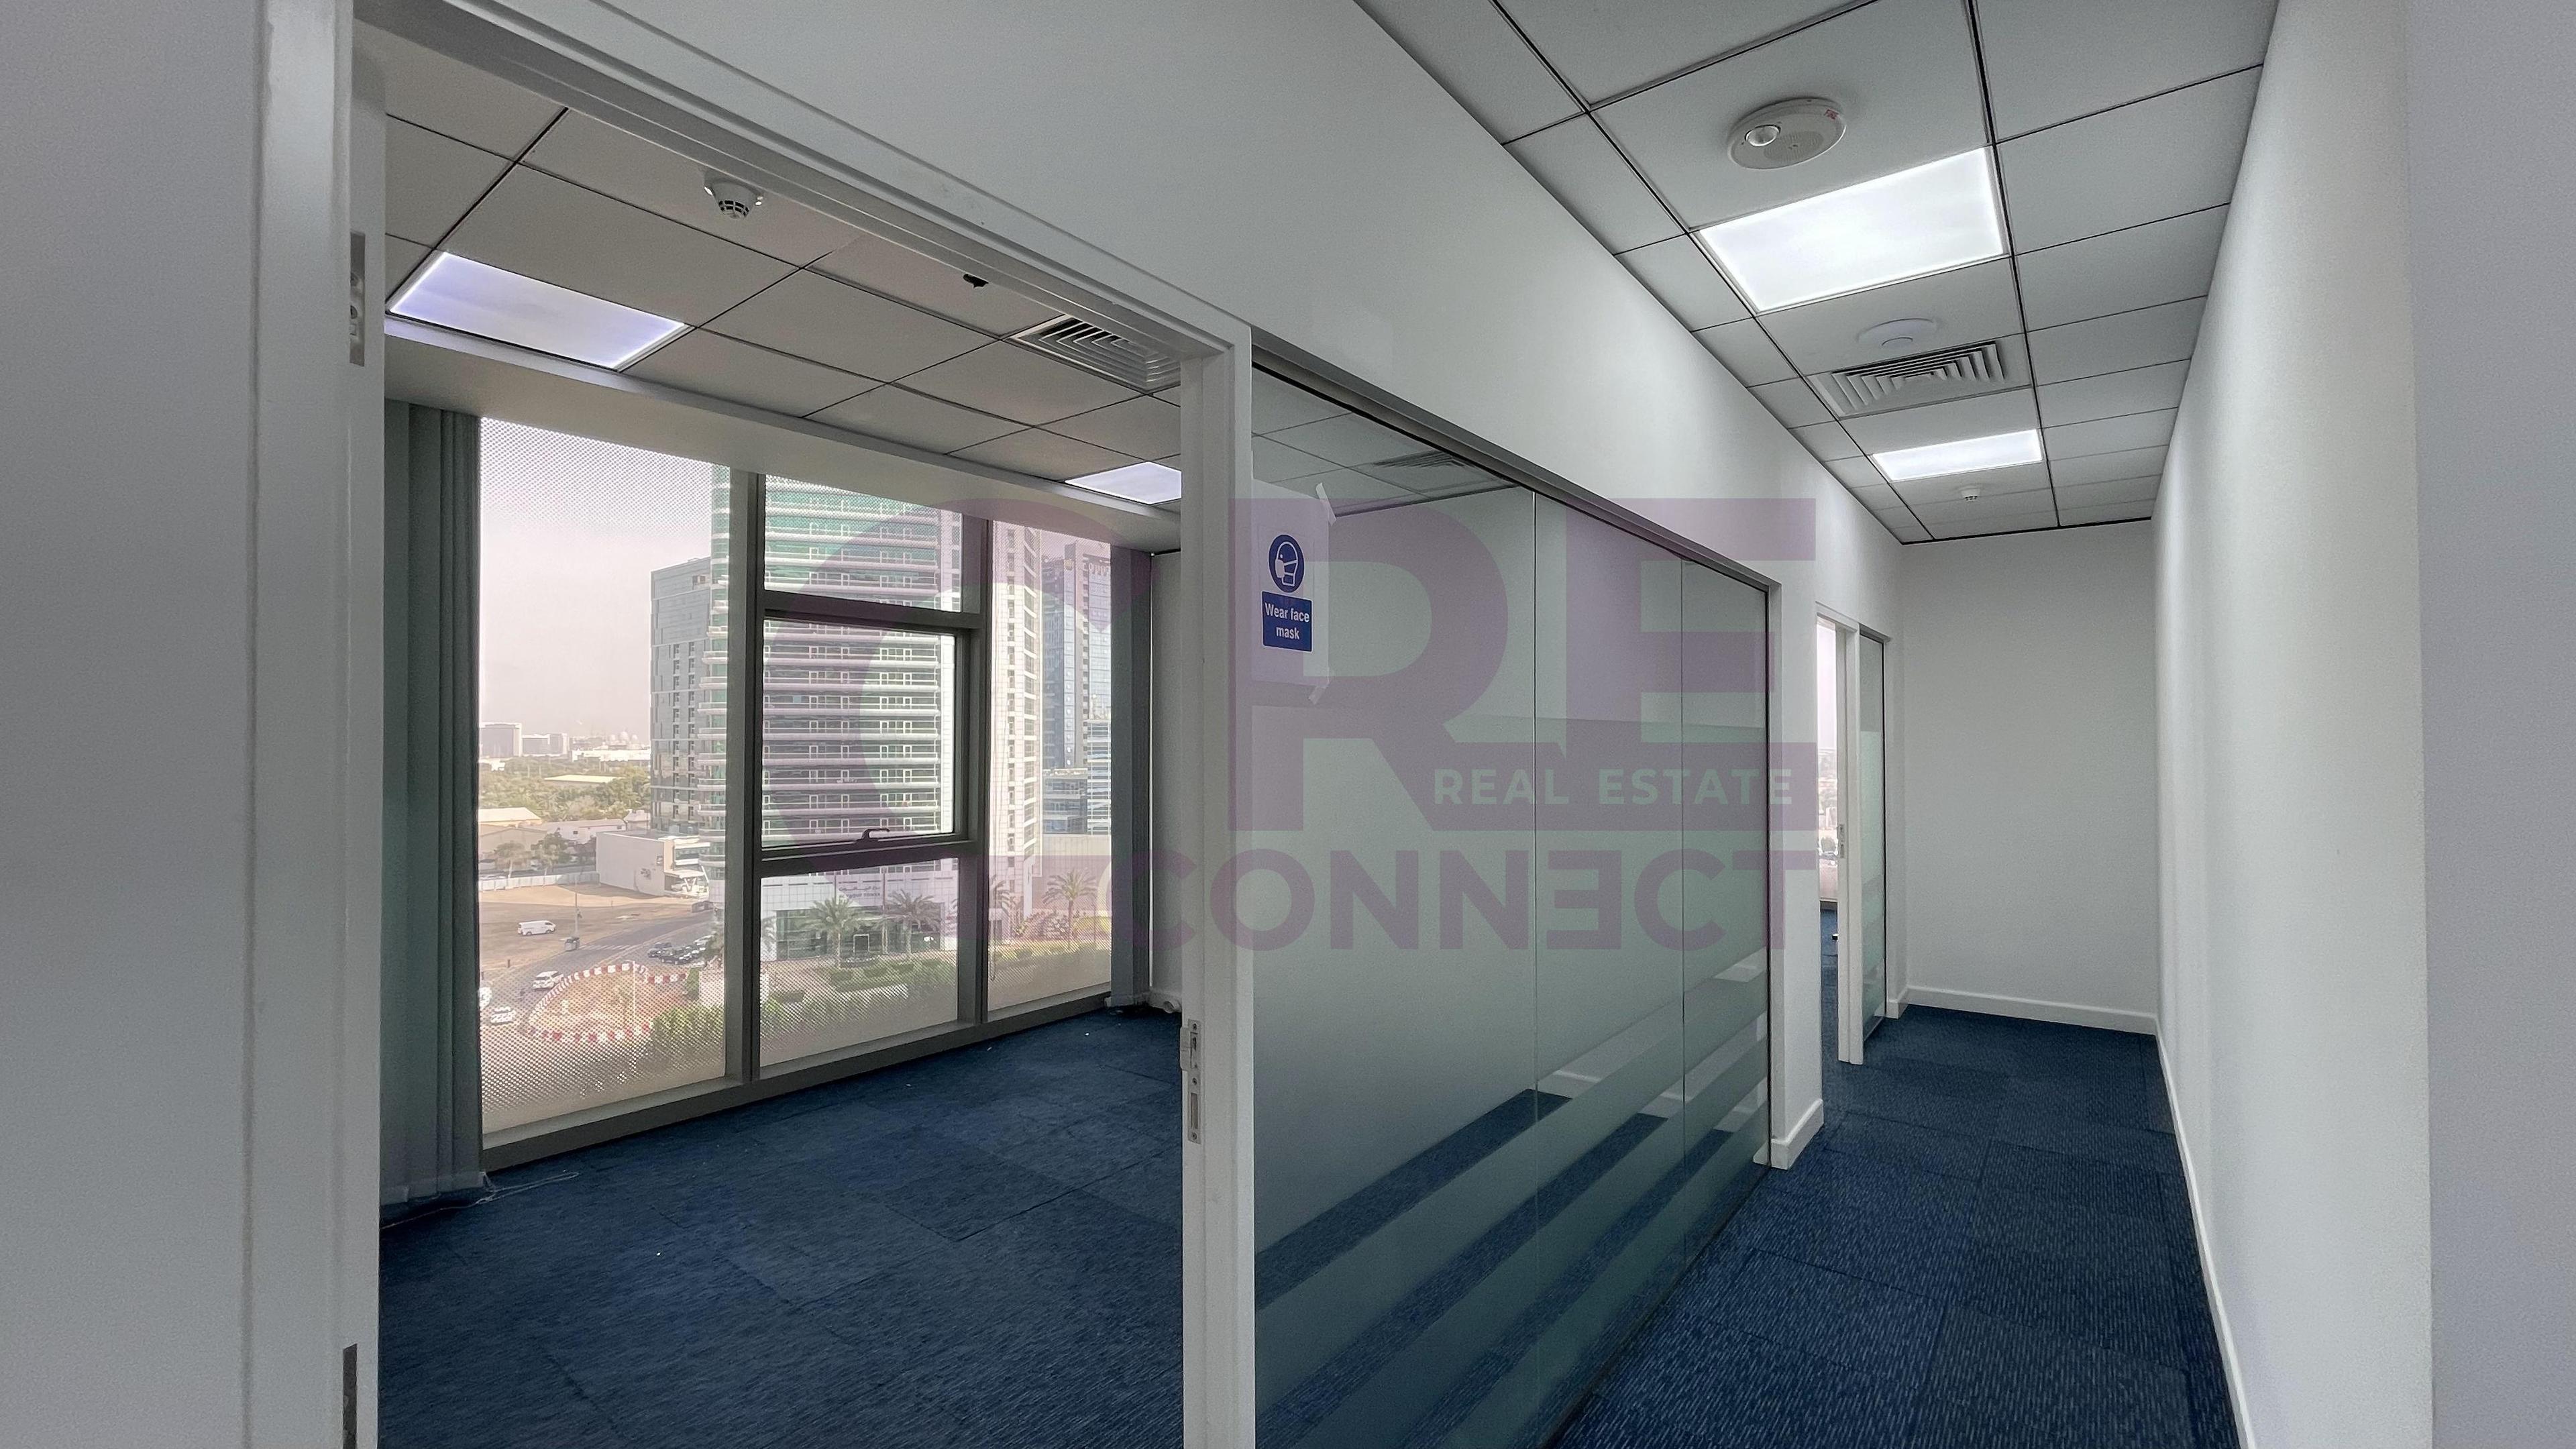 2 bath Office Space for rent in Guardian Towers, Danet Abu Dhabi, Abu Dhabi for price AED 135300 yearly 